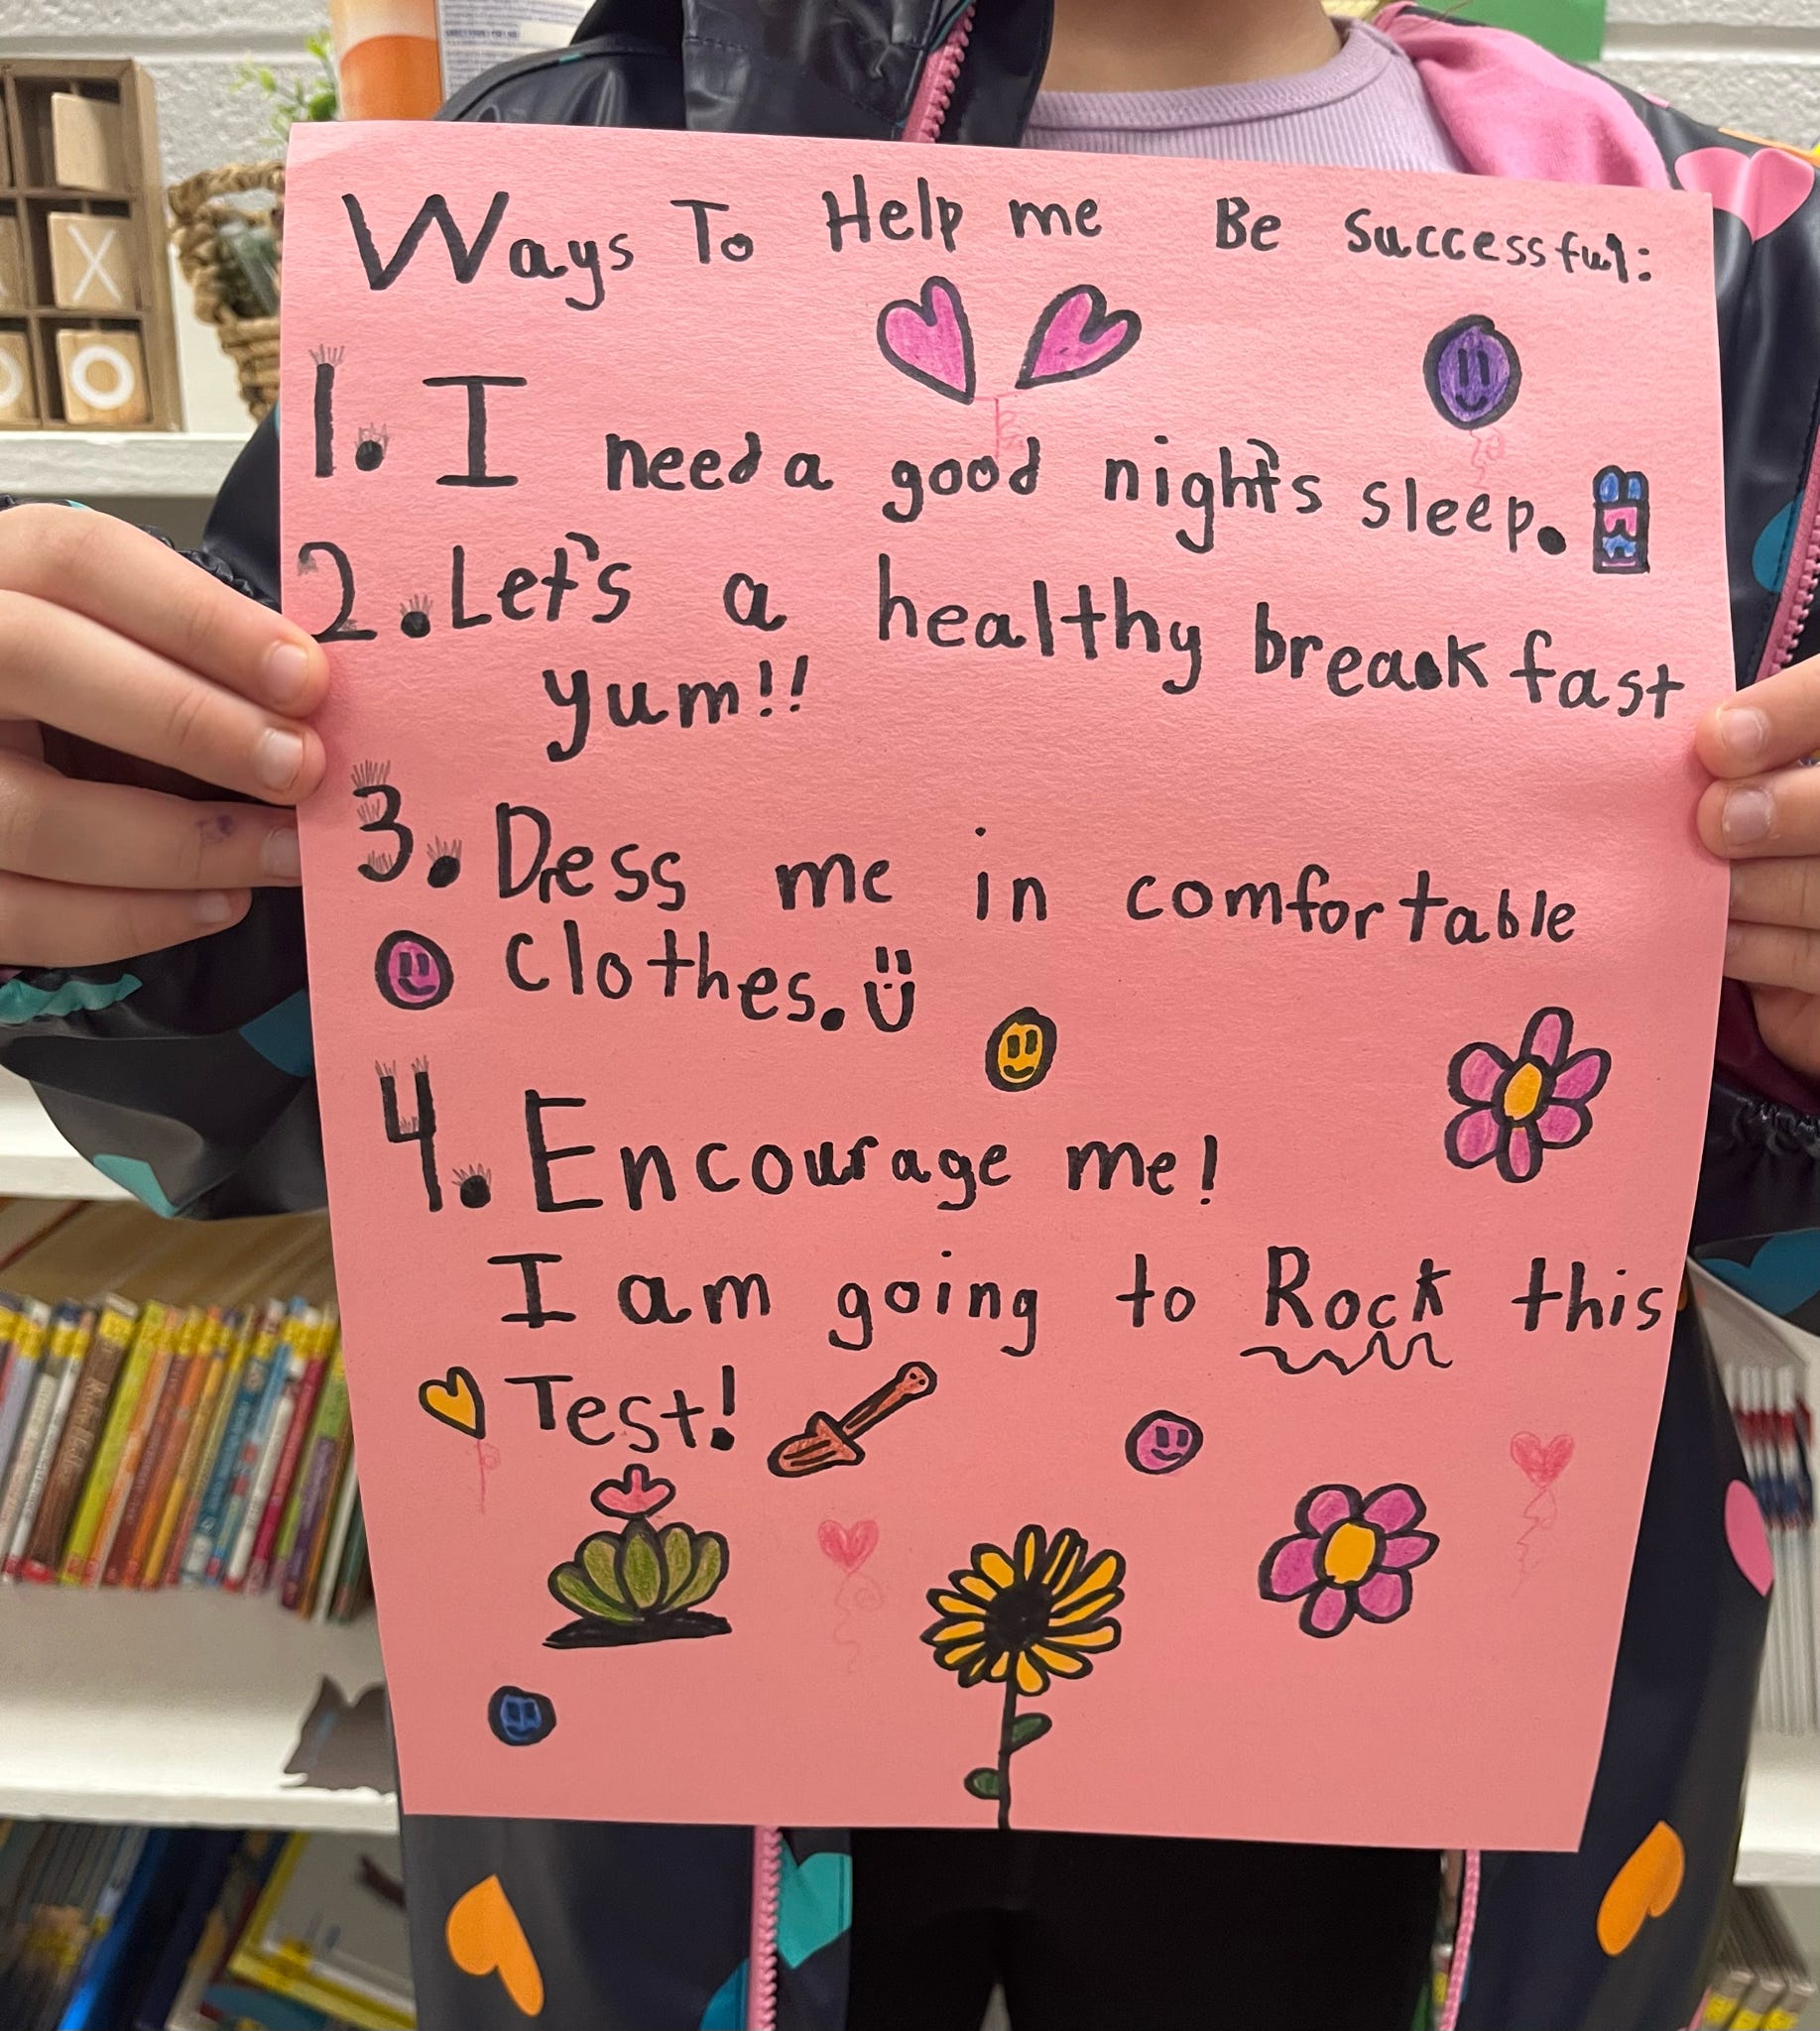 Ways to help me be successful during TCAP week. 1. I need a good night's sleep. 2. Lets have a healthy breakfast! Yum! 3. Dress me in comfortable clothes. 4. Encourage me! I am going to rock this test!